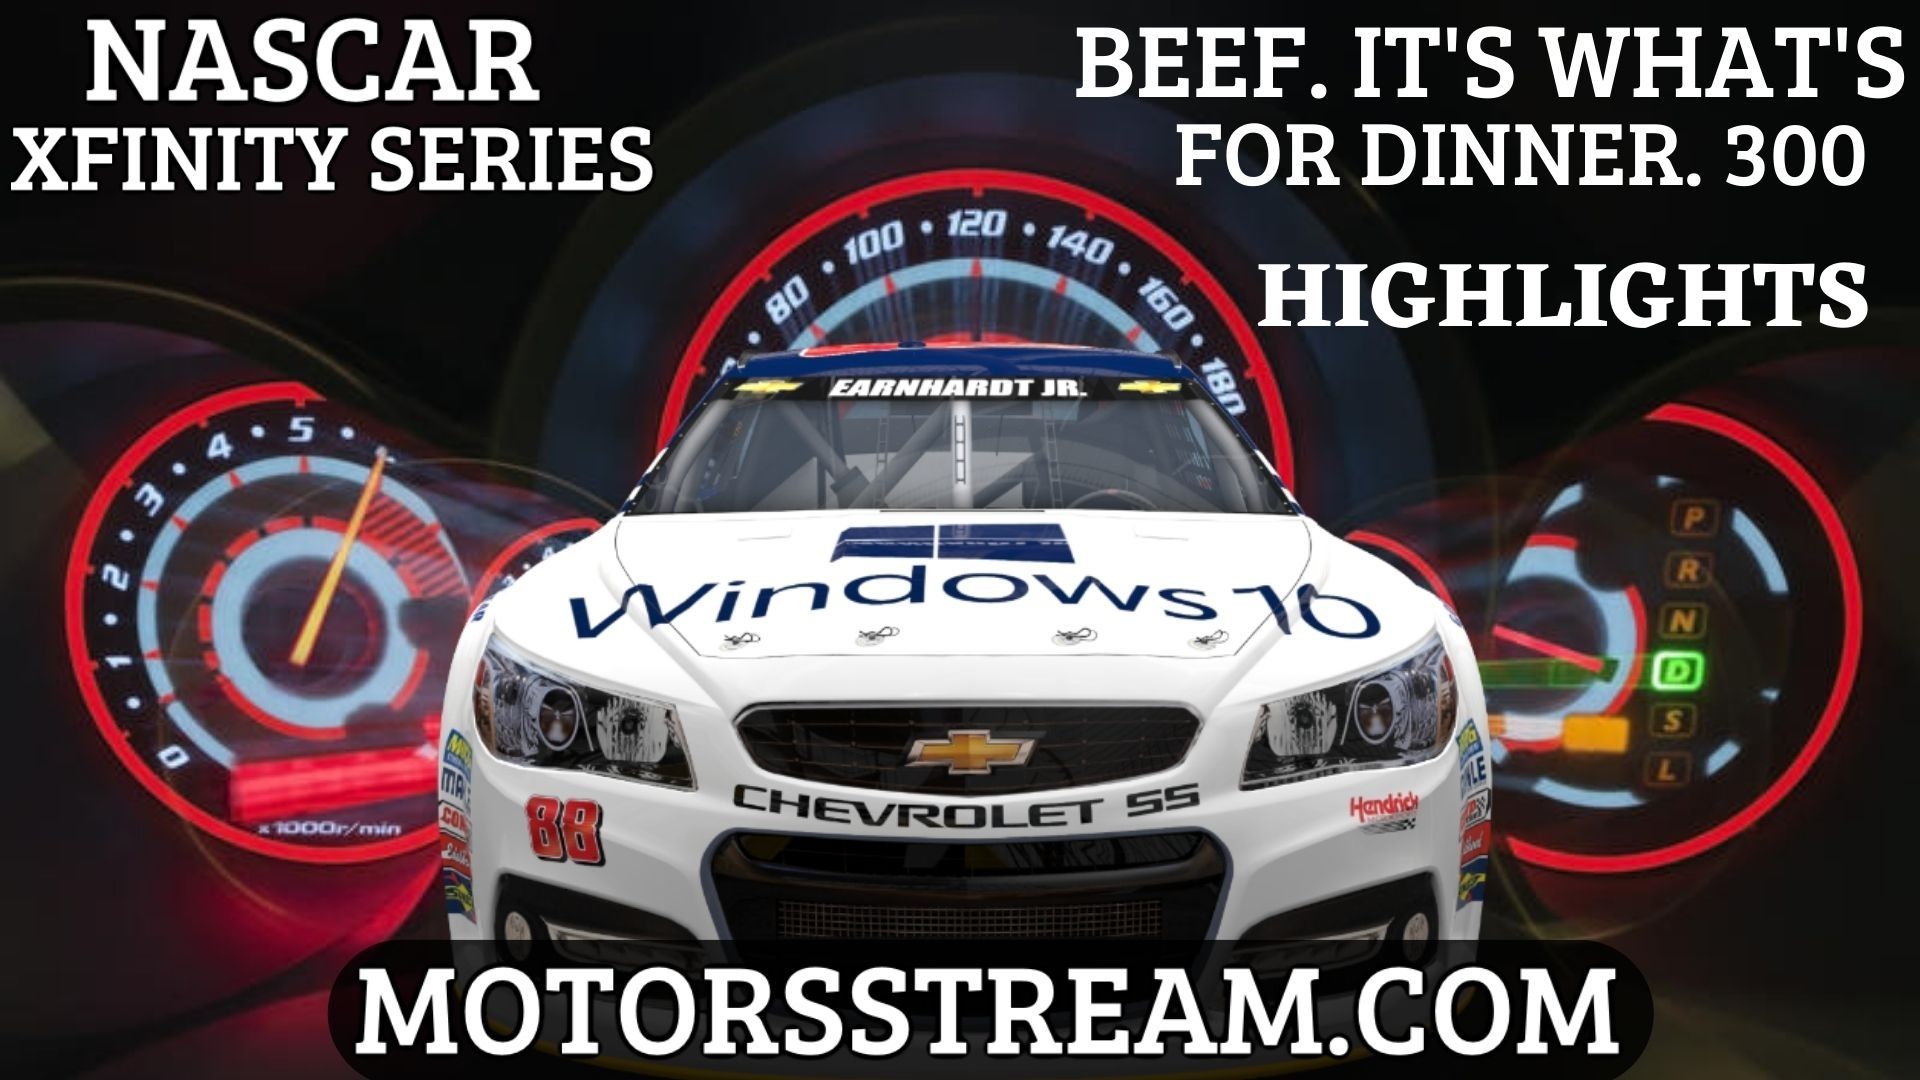 Nascar Beef Its Whats For Dinner 300 Highlights 2021 Xfinity Series